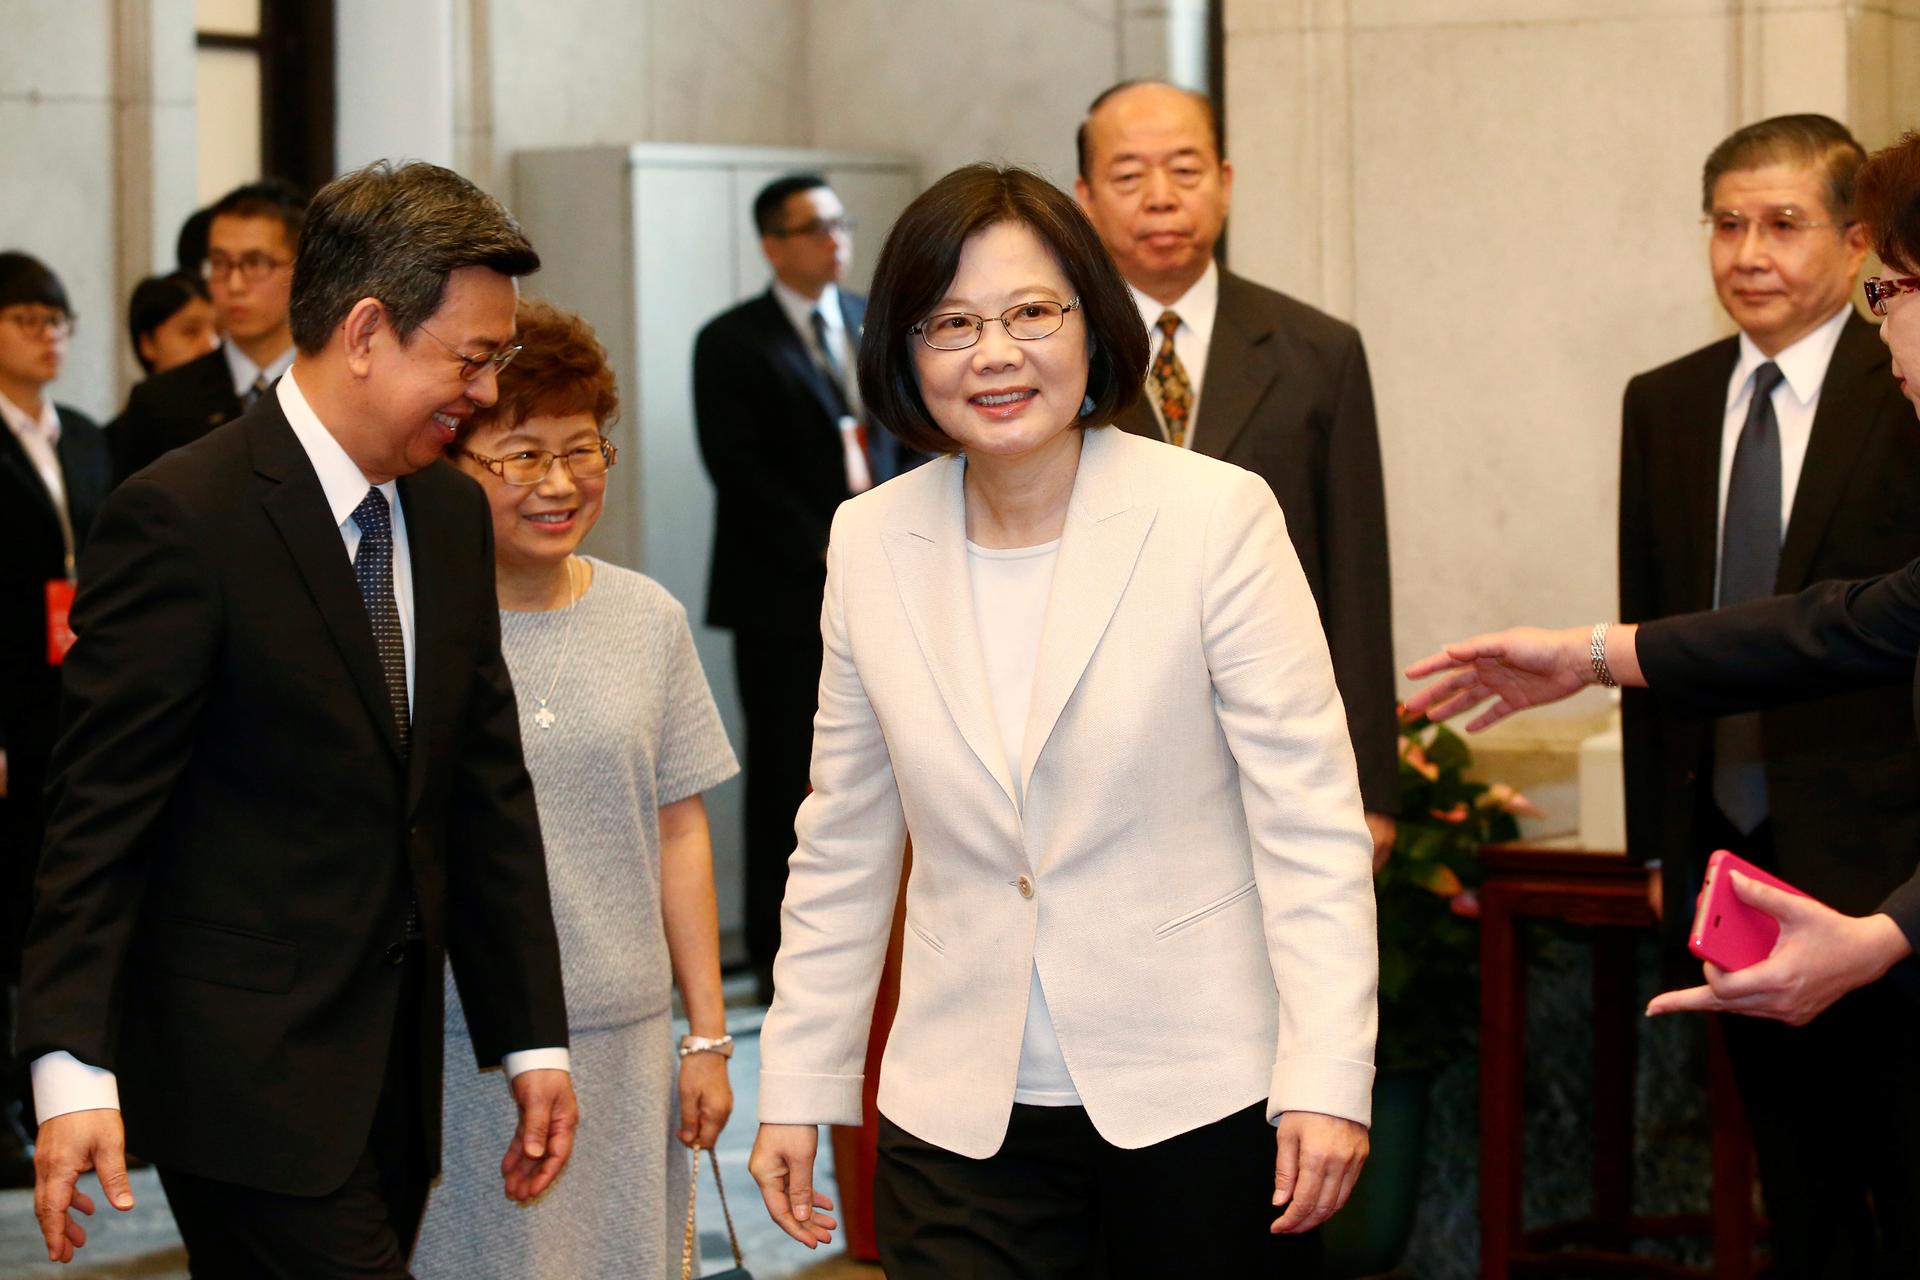 Tsai Ing-wen arrives at the Presidential Office to swear in as Taiwan's President in Taipei, Taiwan on May 20, 2016.